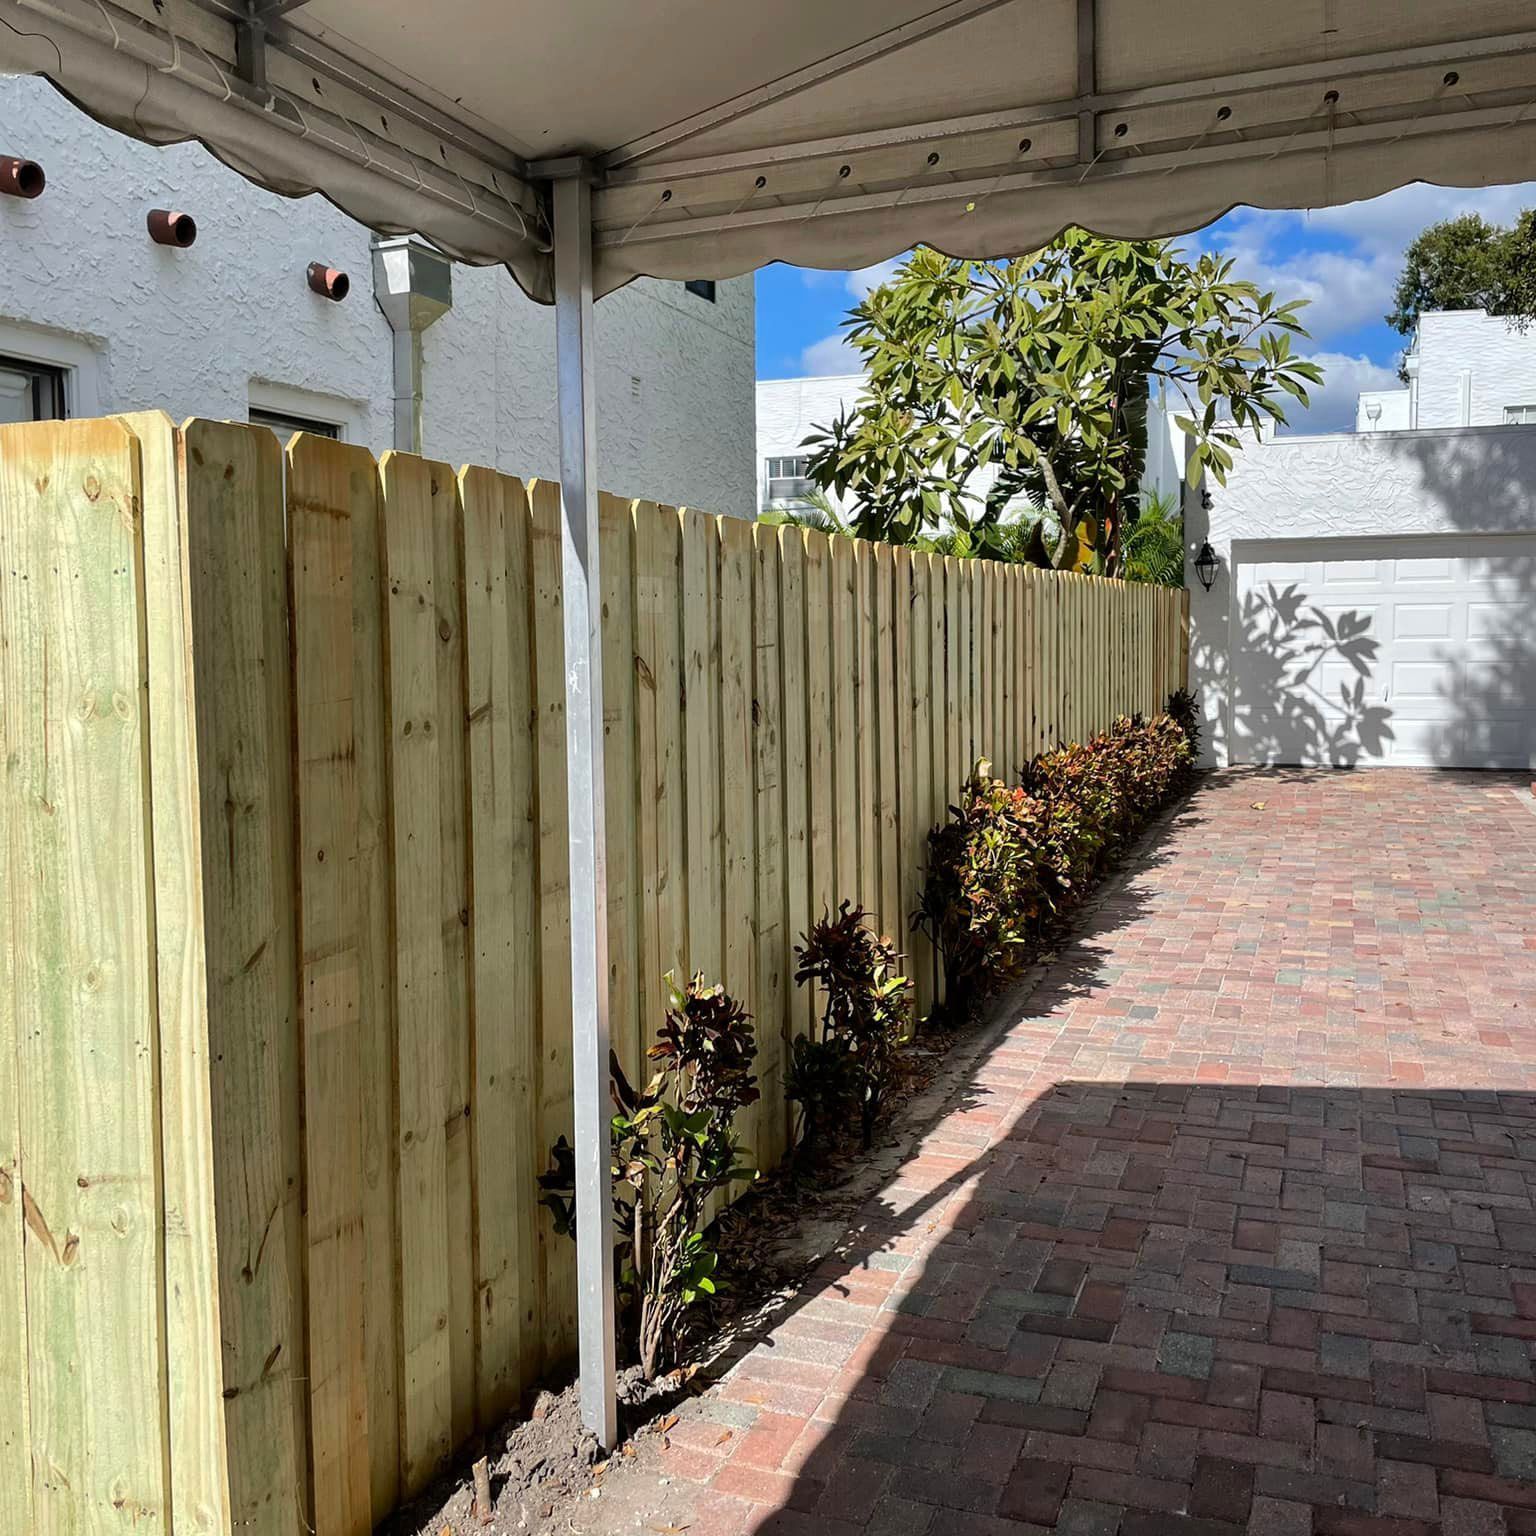 Sturdy Barrier | Tampa, FL | Bay Area Fencing Company